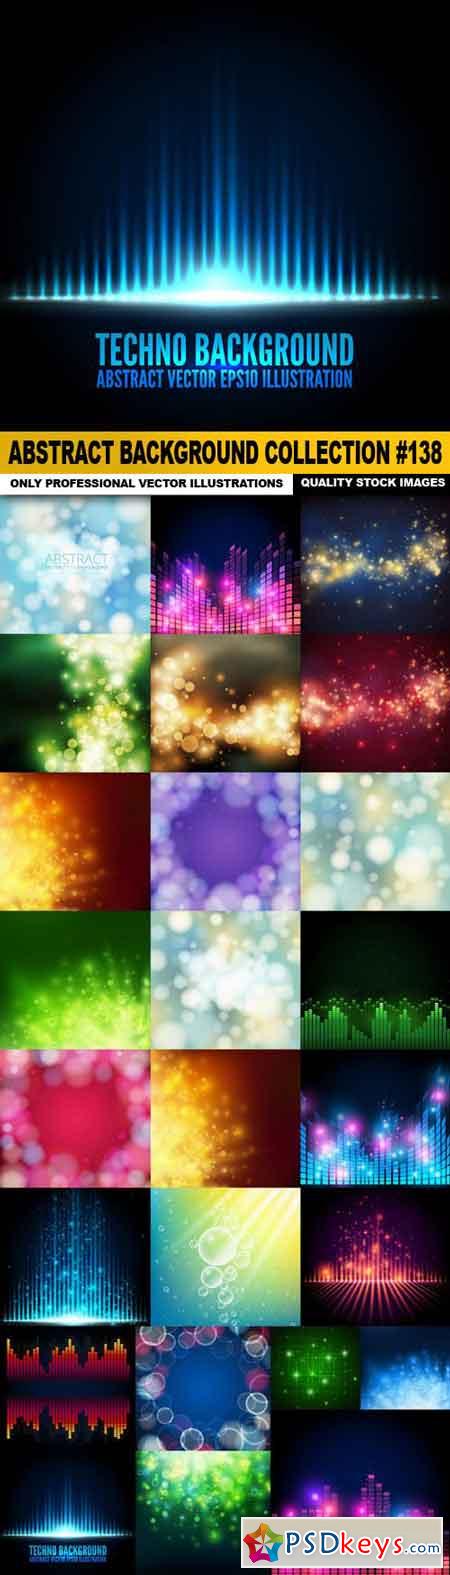 Abstract Background Collection #138 - 25 Vector